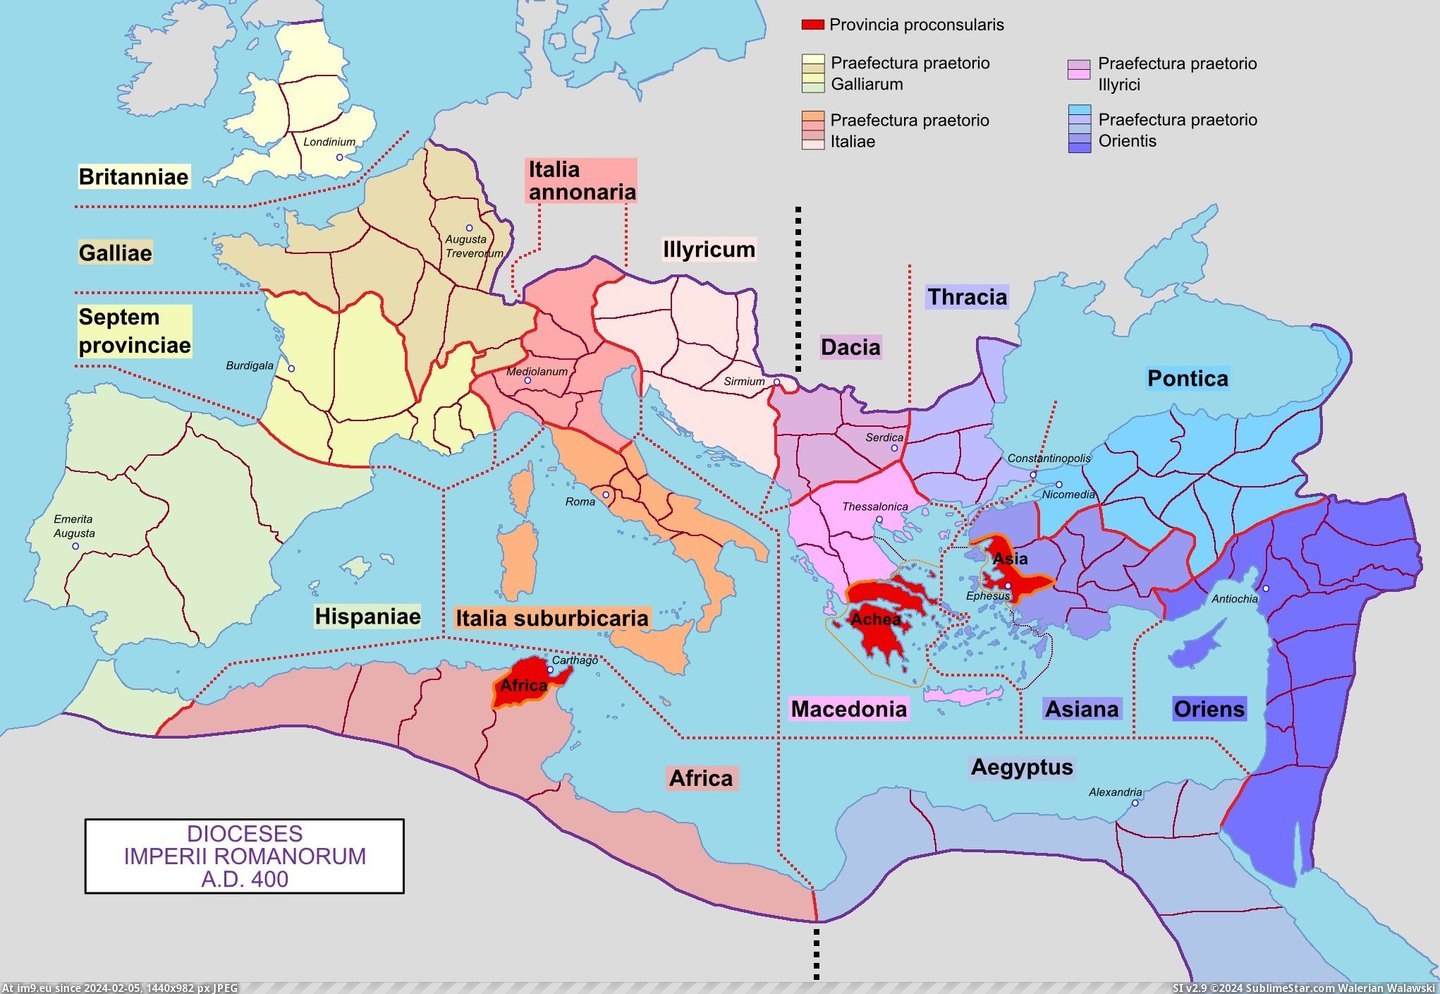 #Empire  #Roman [Mapporn] Dioceses of the Roman Empire in 400 AD [2042x1404] Pic. (Изображение из альбом My r/MAPS favs))